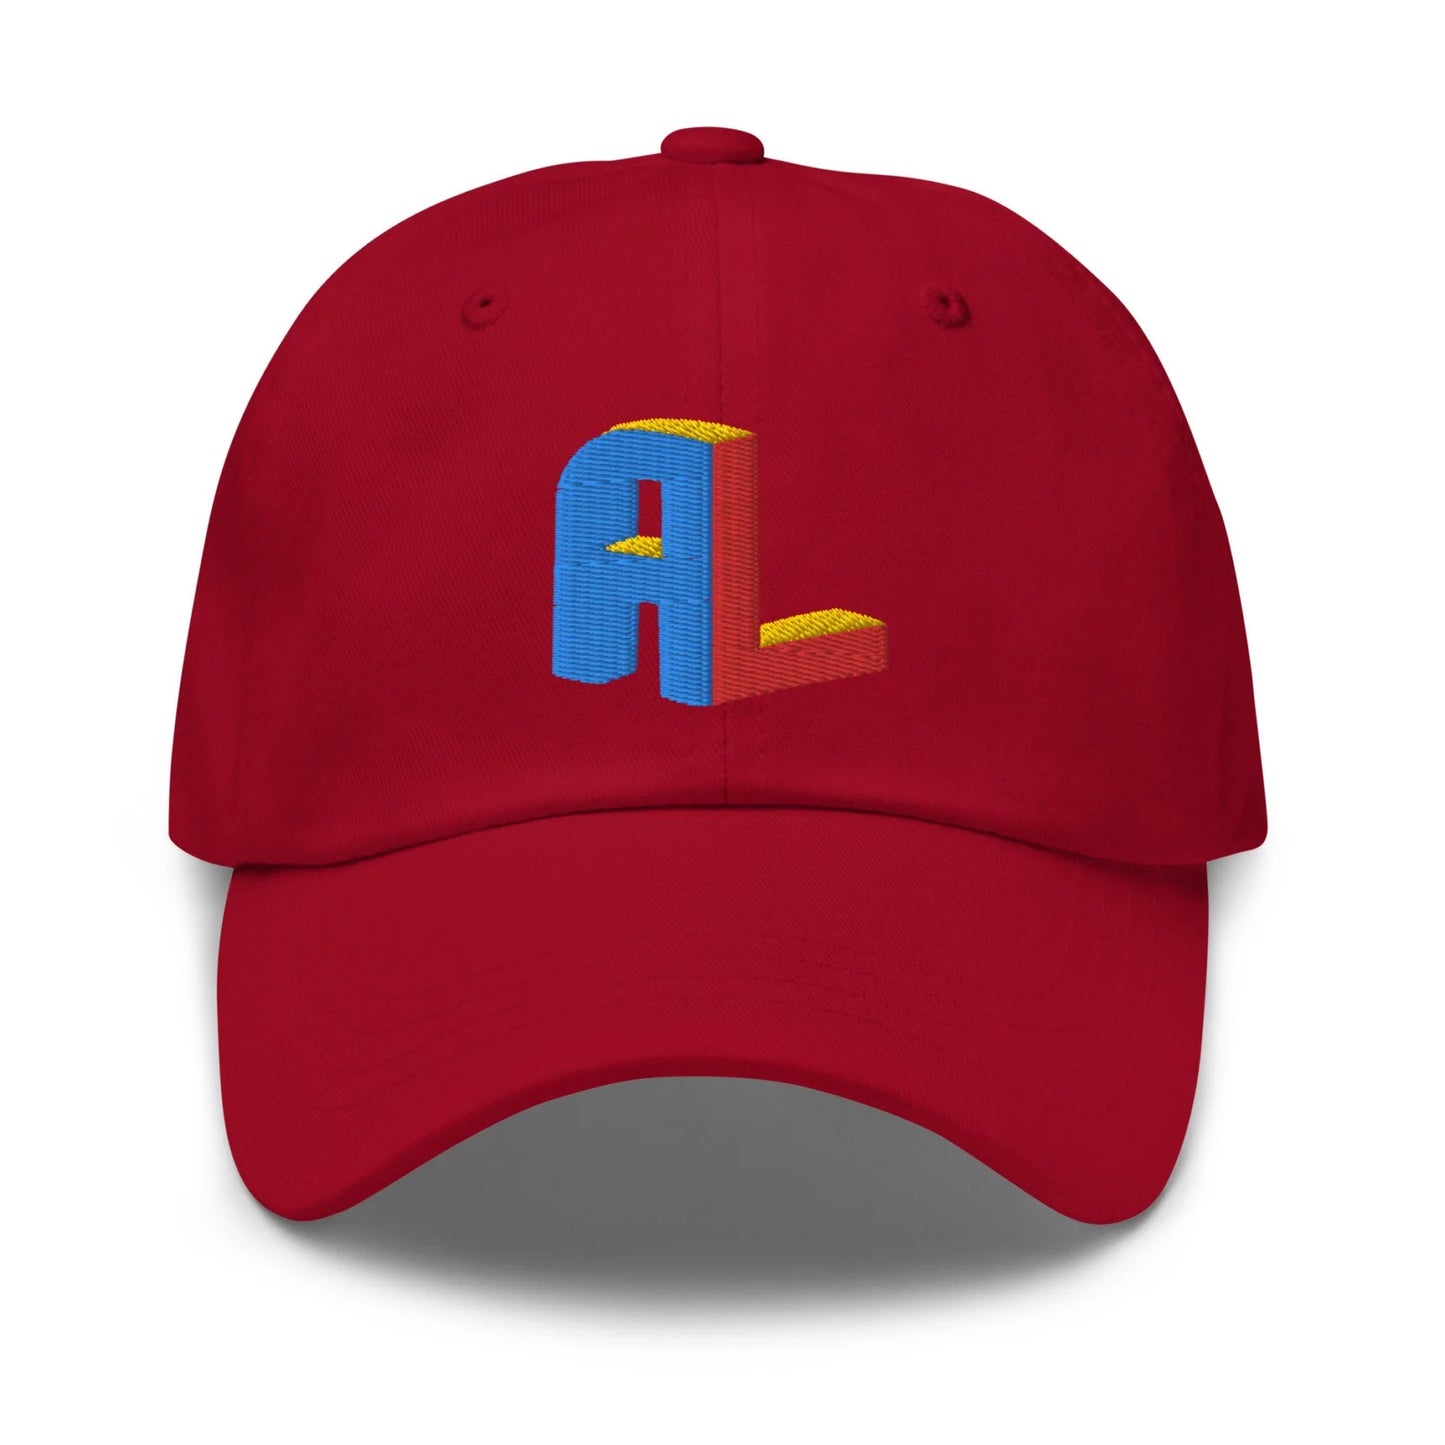 Ance Larmstrong ShowZone baseball dad hat in cranberry red